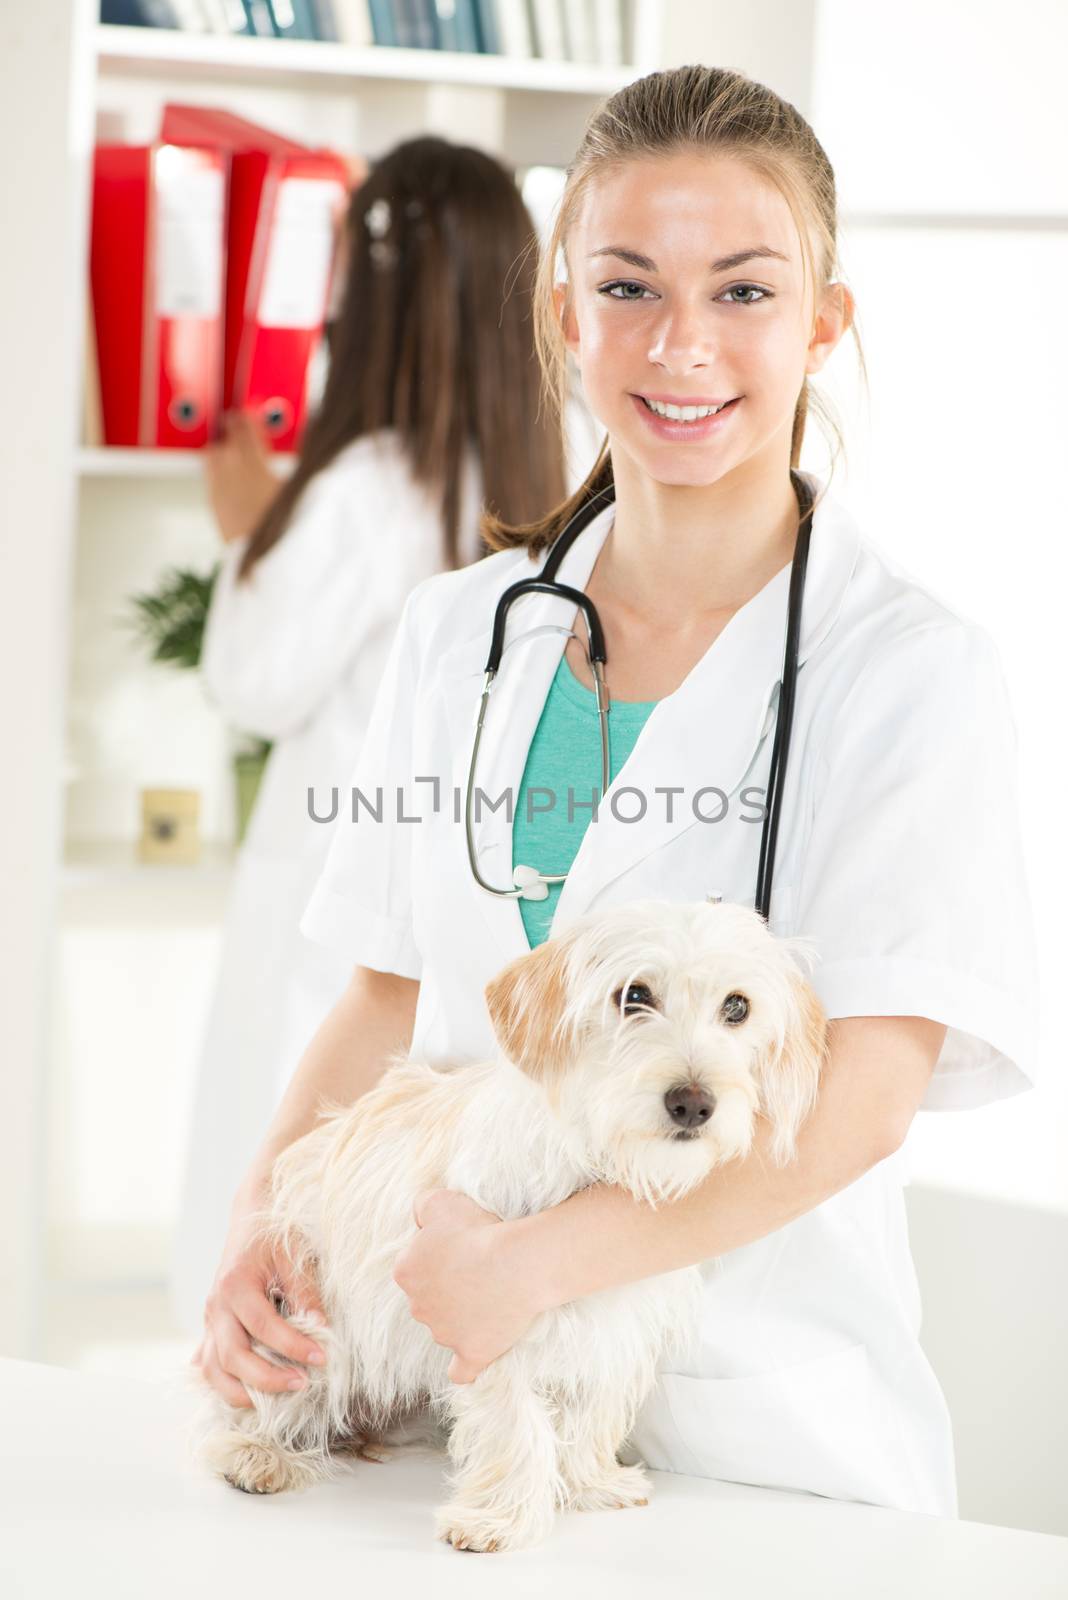 At the veterinary by MilanMarkovic78